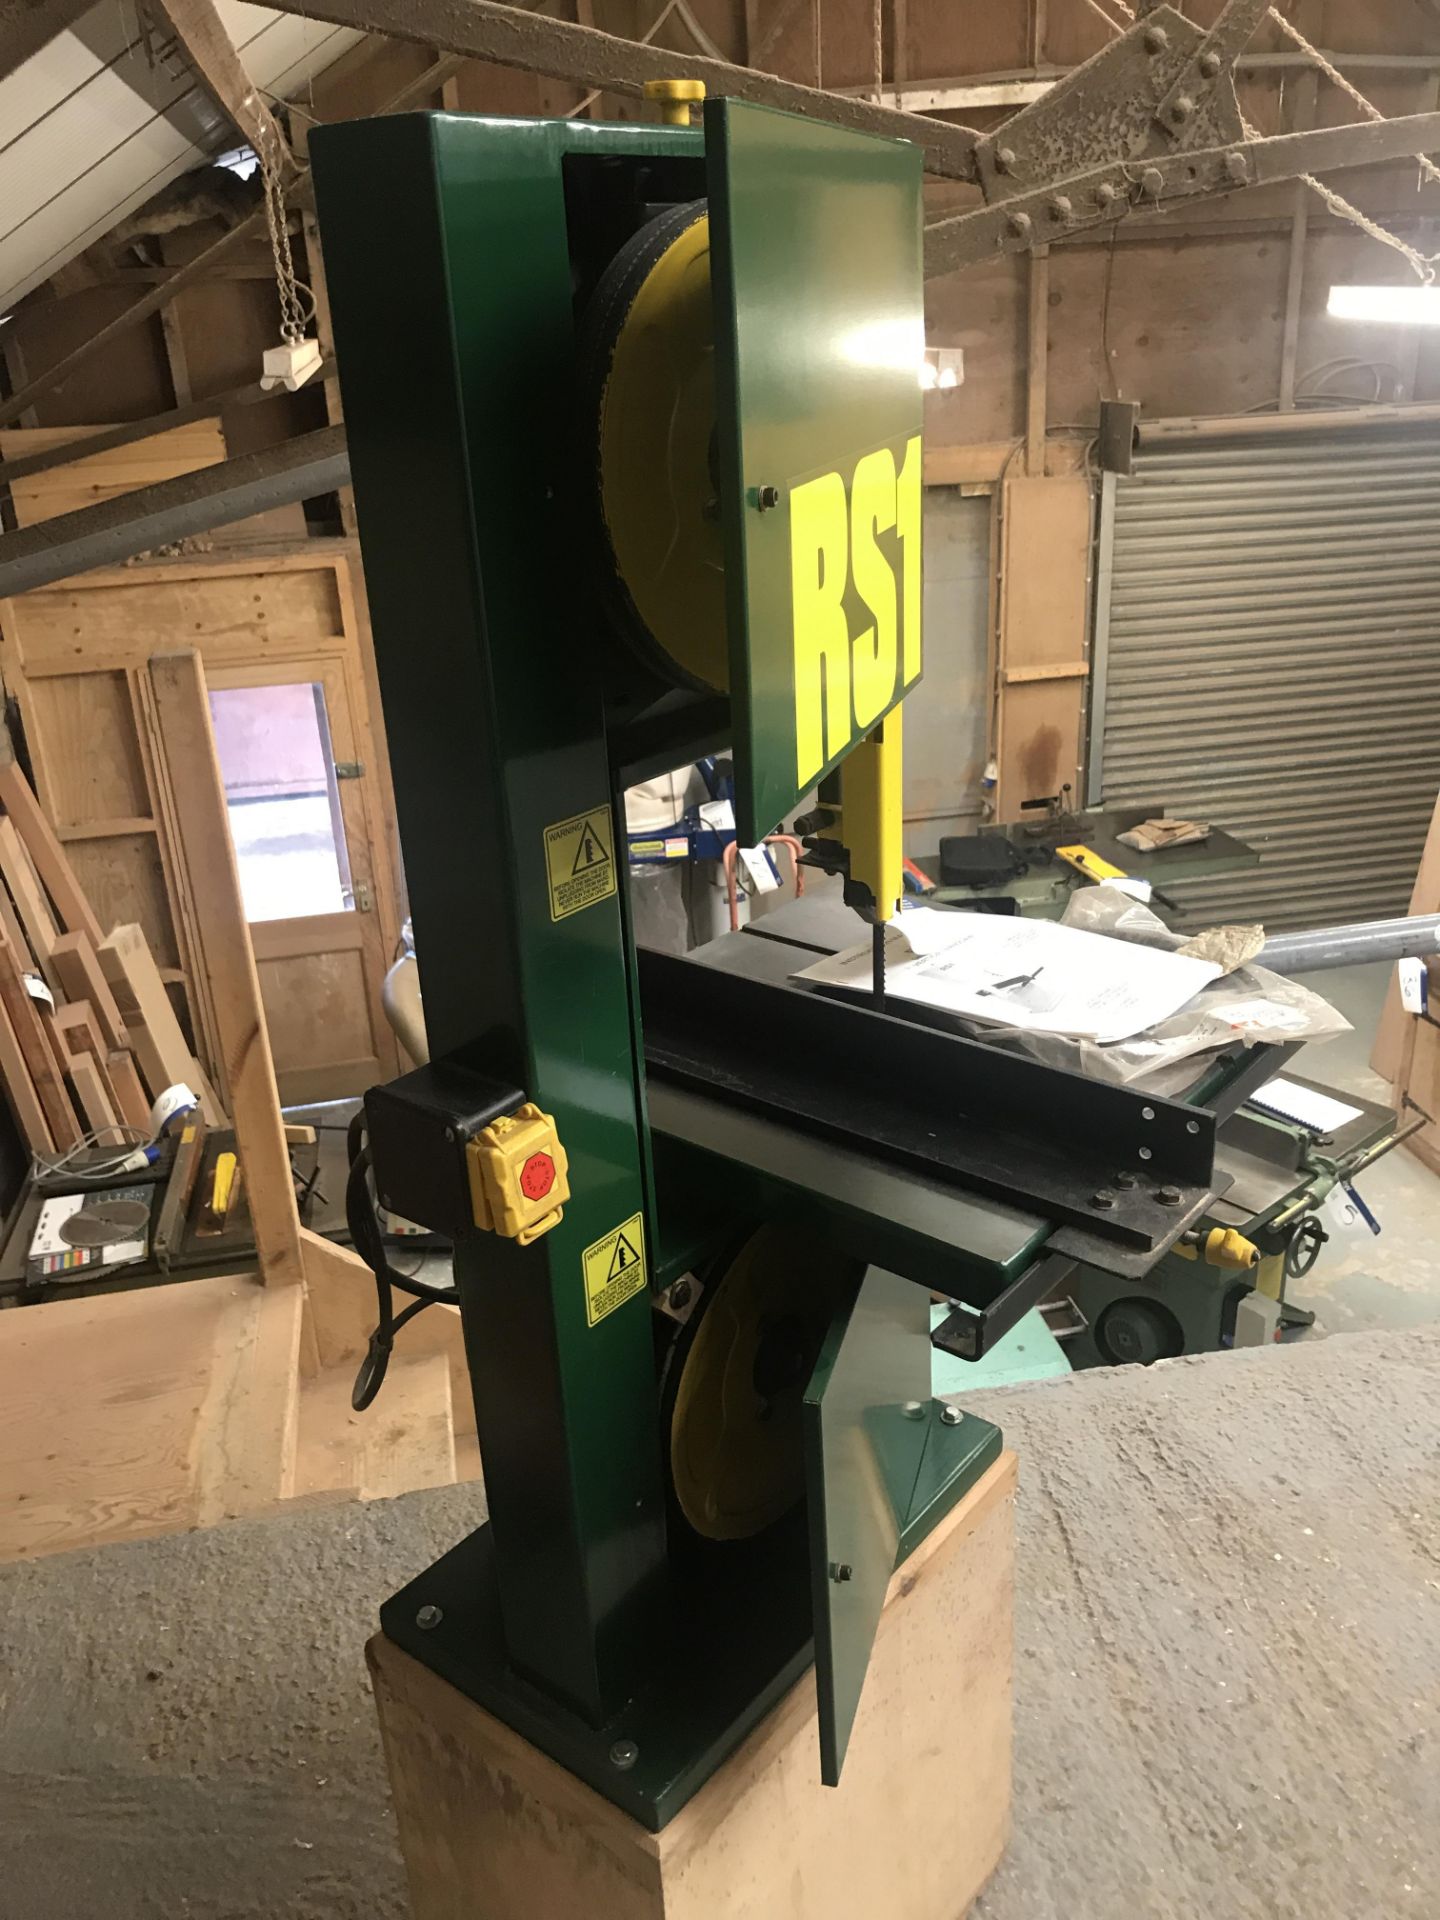 Startrite R51 Vertical Bandsaw, serial no. 202097, year of manufacture 1999, single phase, with - Bild 2 aus 9